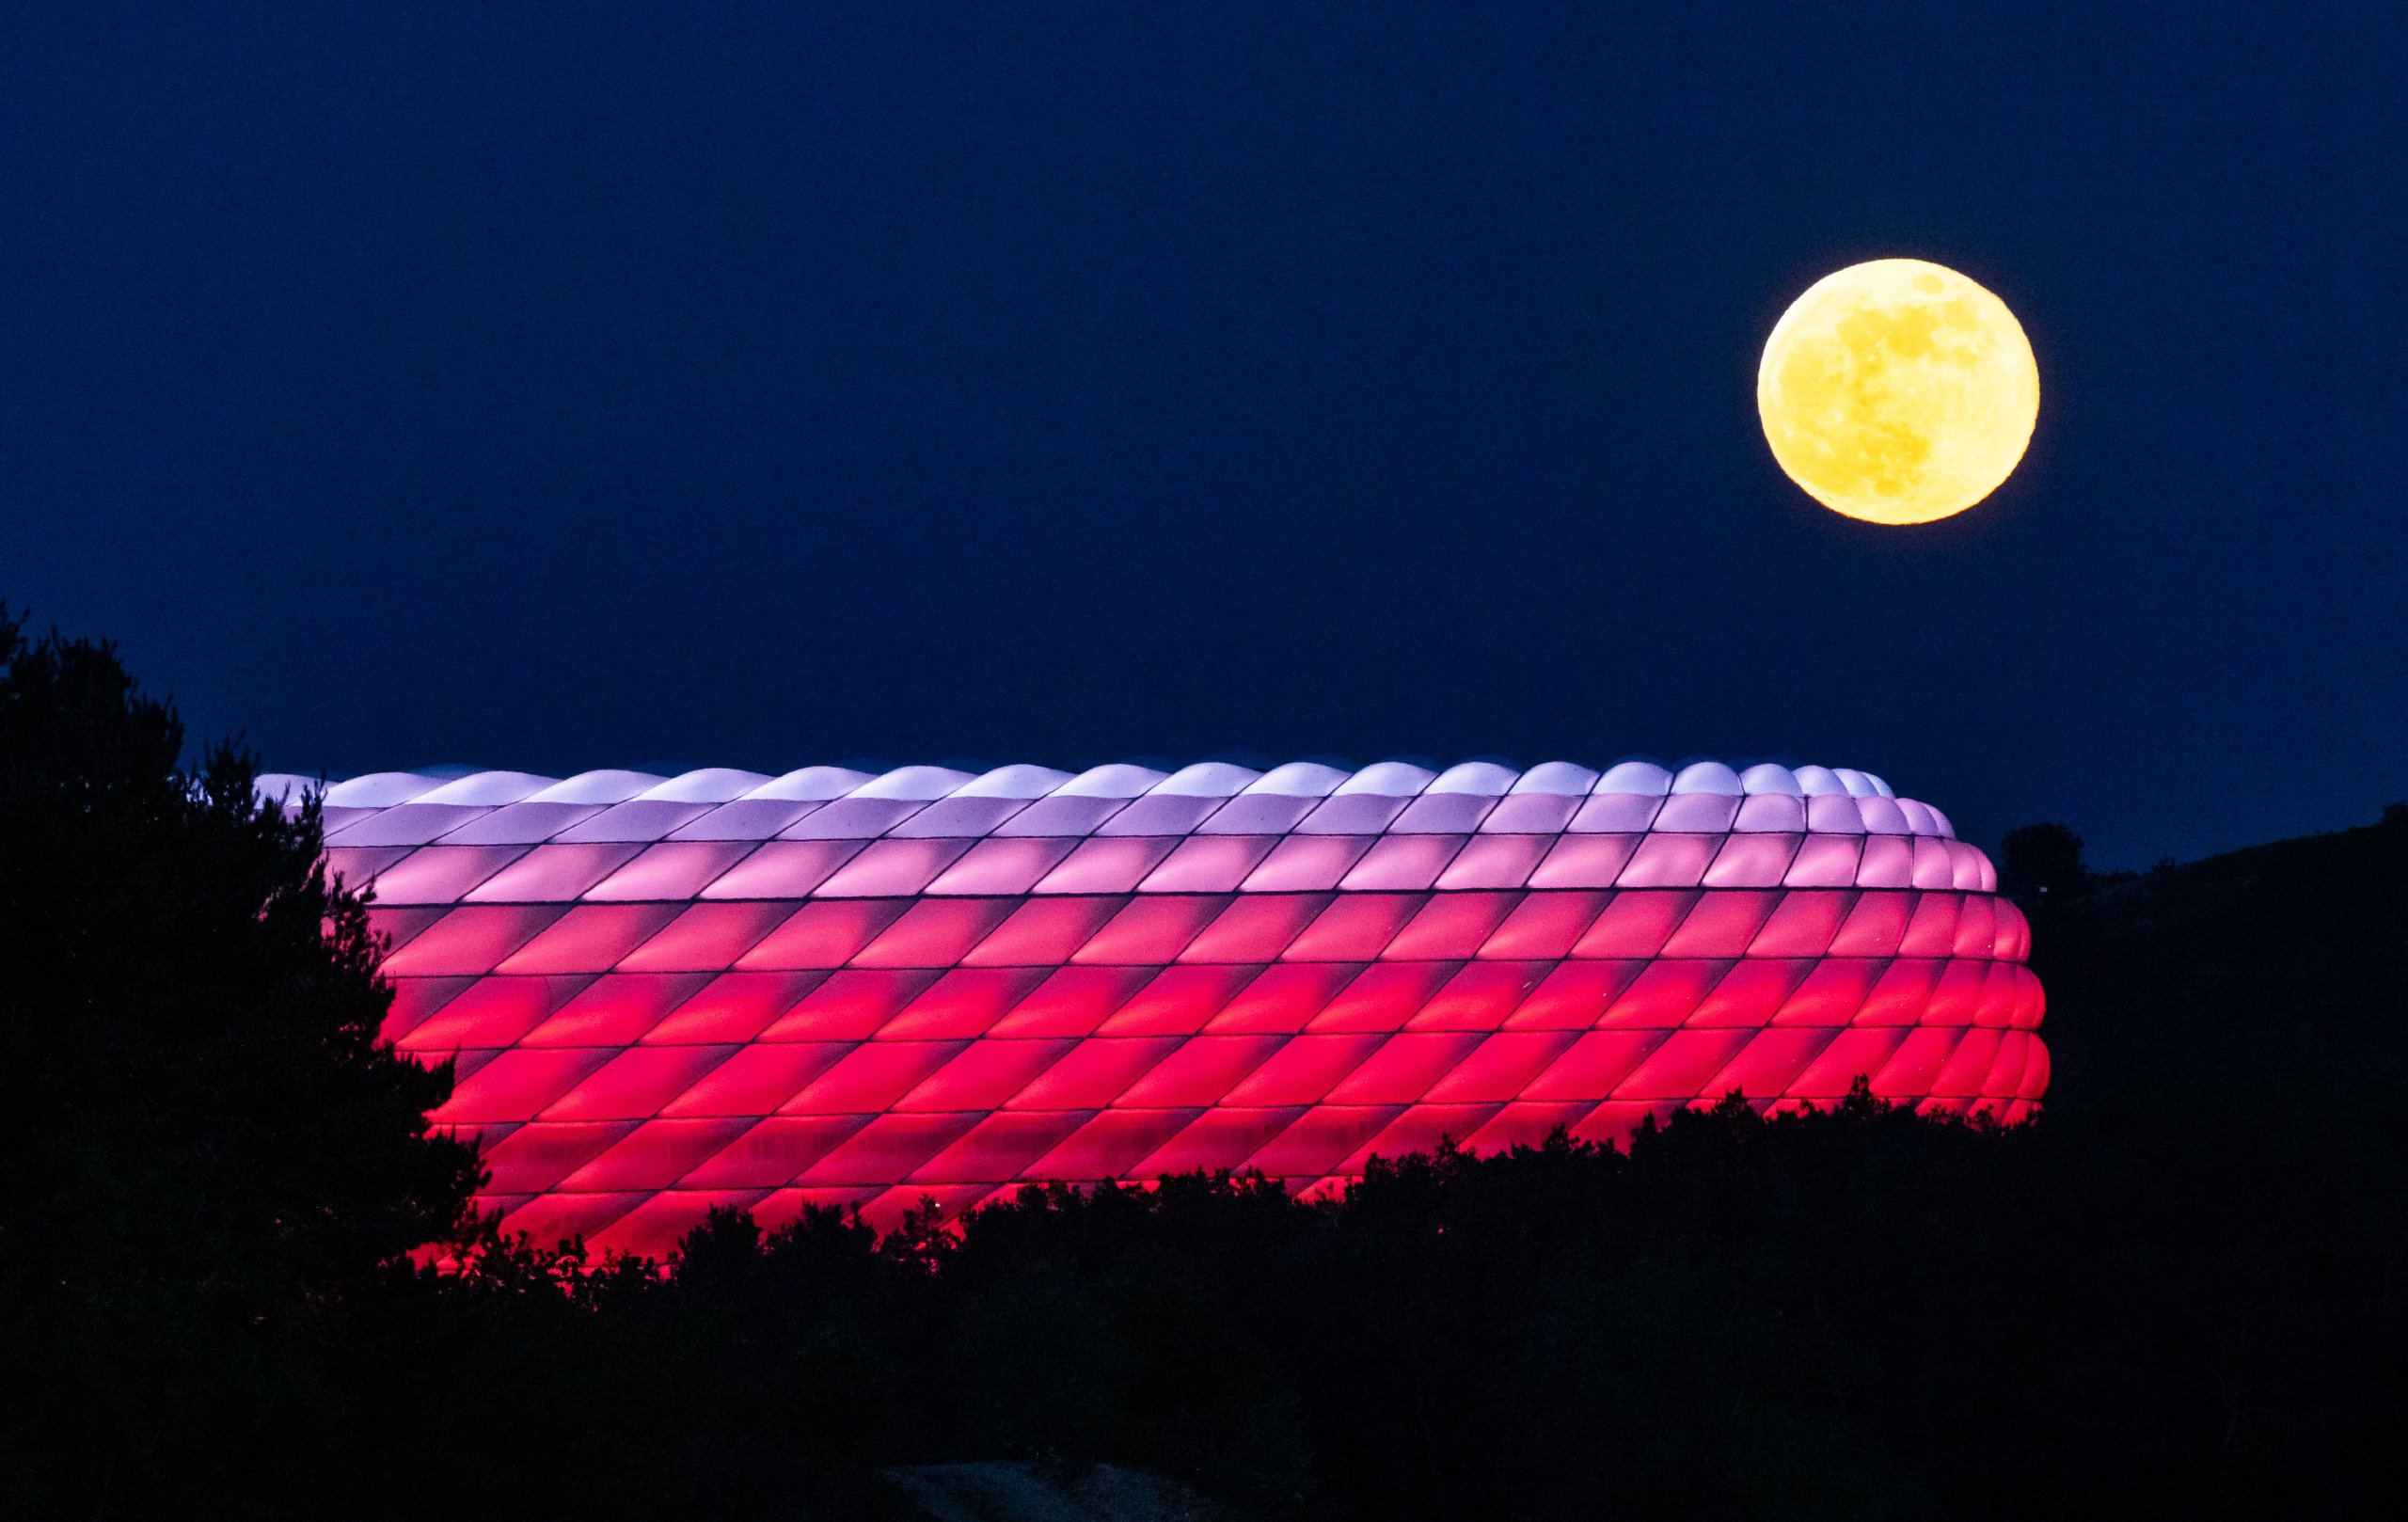 Full moon over the Allianz Arena